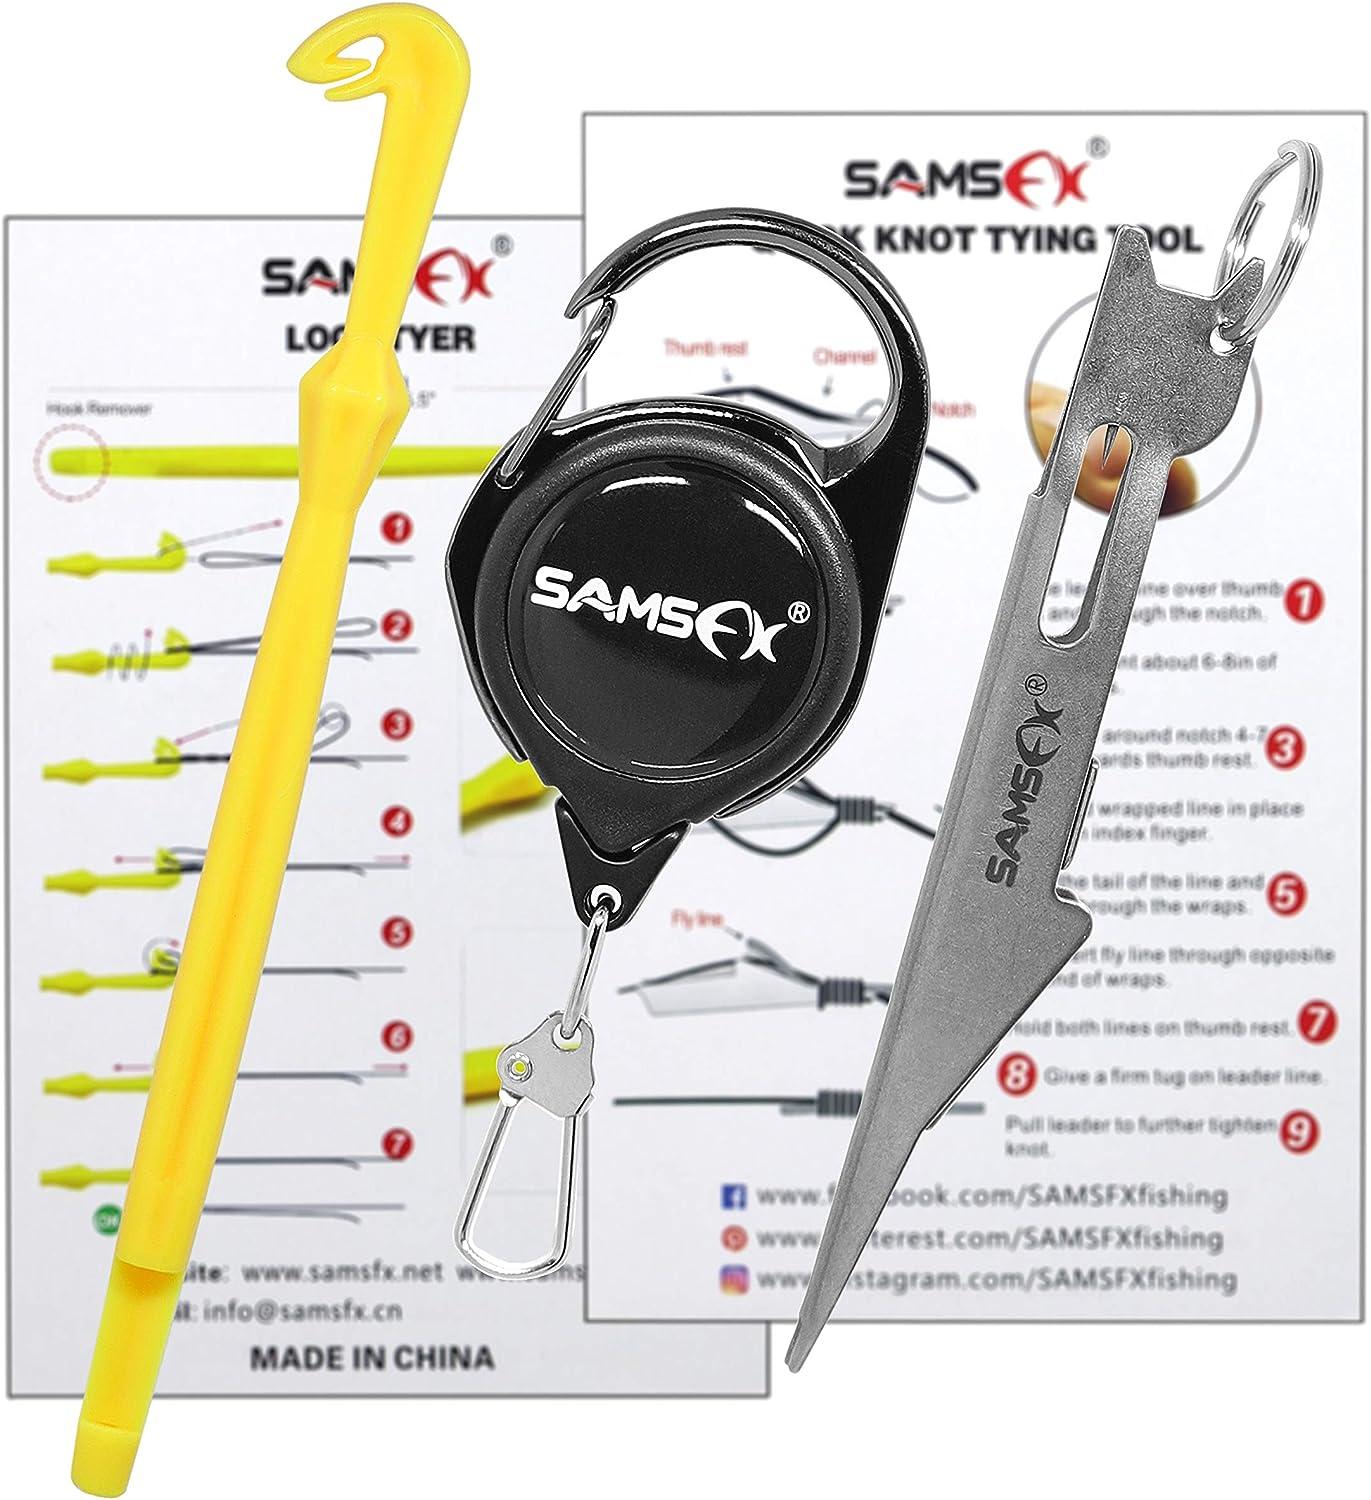 SAMSFX Fly Fishing Knot Tying Tool for Hooks, Lures and Lines